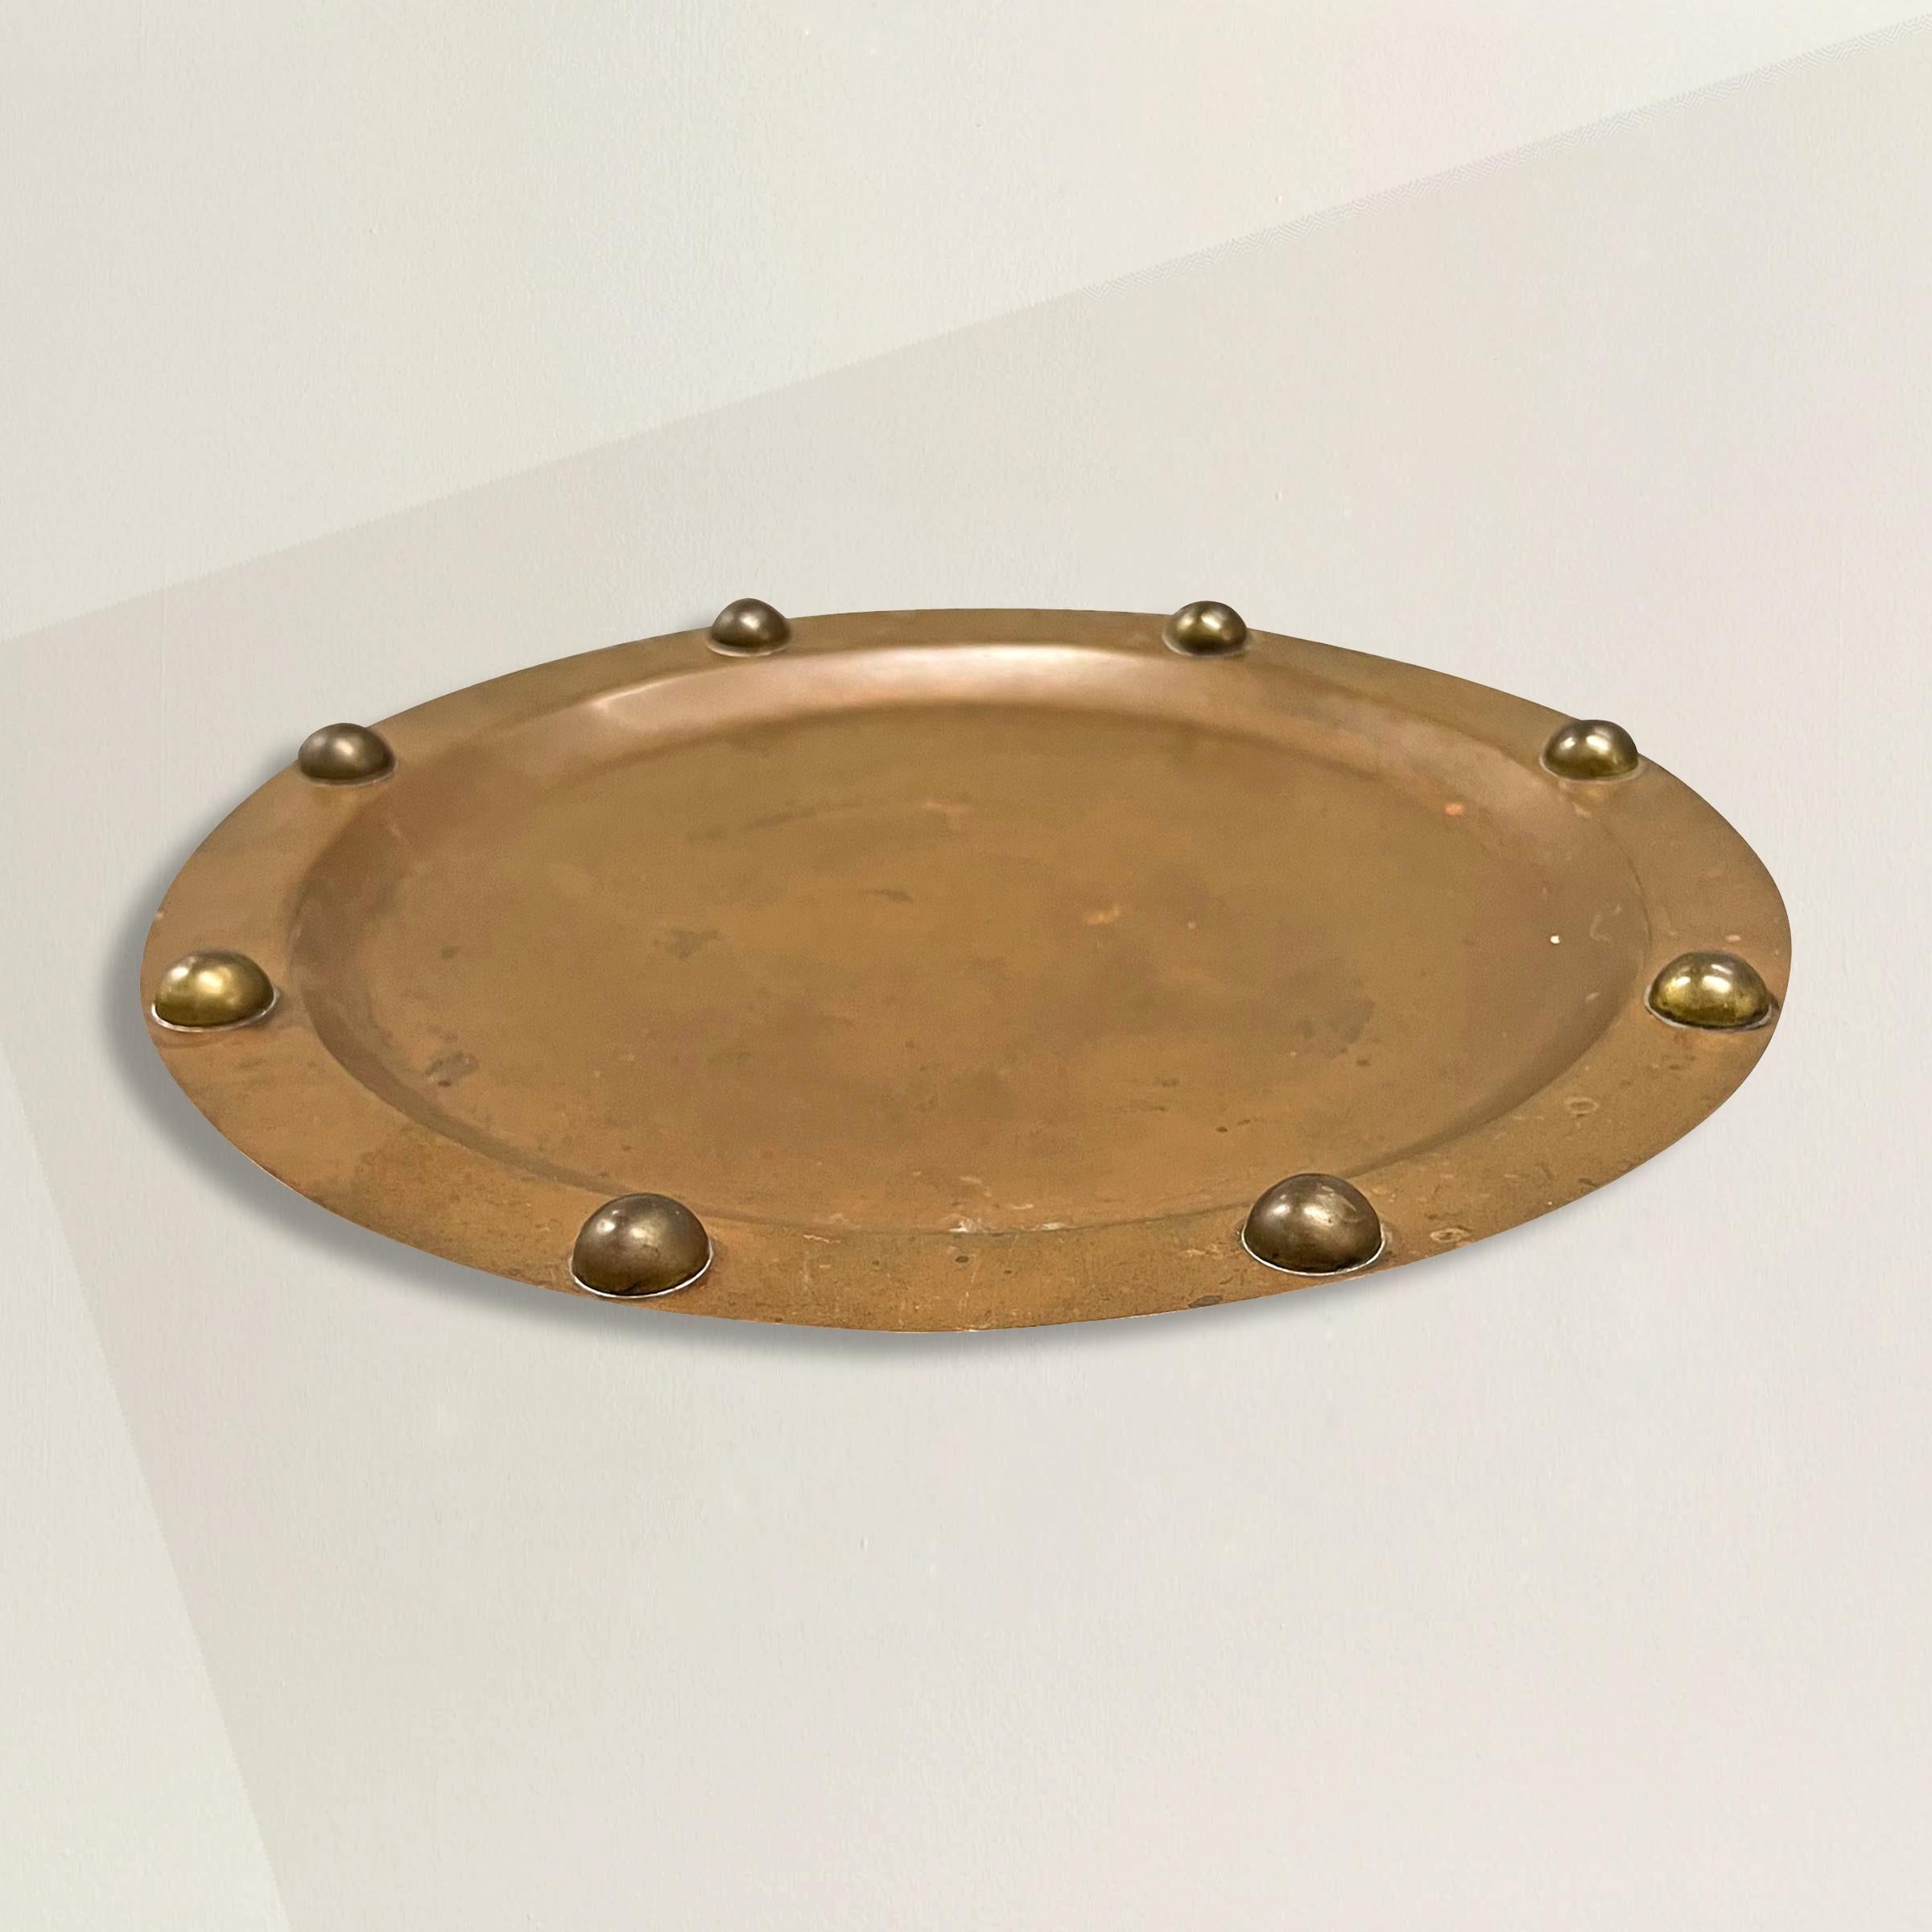 A chic mid-20th century Mexican copper tray with robust round brass rivets around the perimeter. The perfect tray to set on your bar to hold decanters or glasses, or on your entry console table to hold mail, keys, or pocket change.